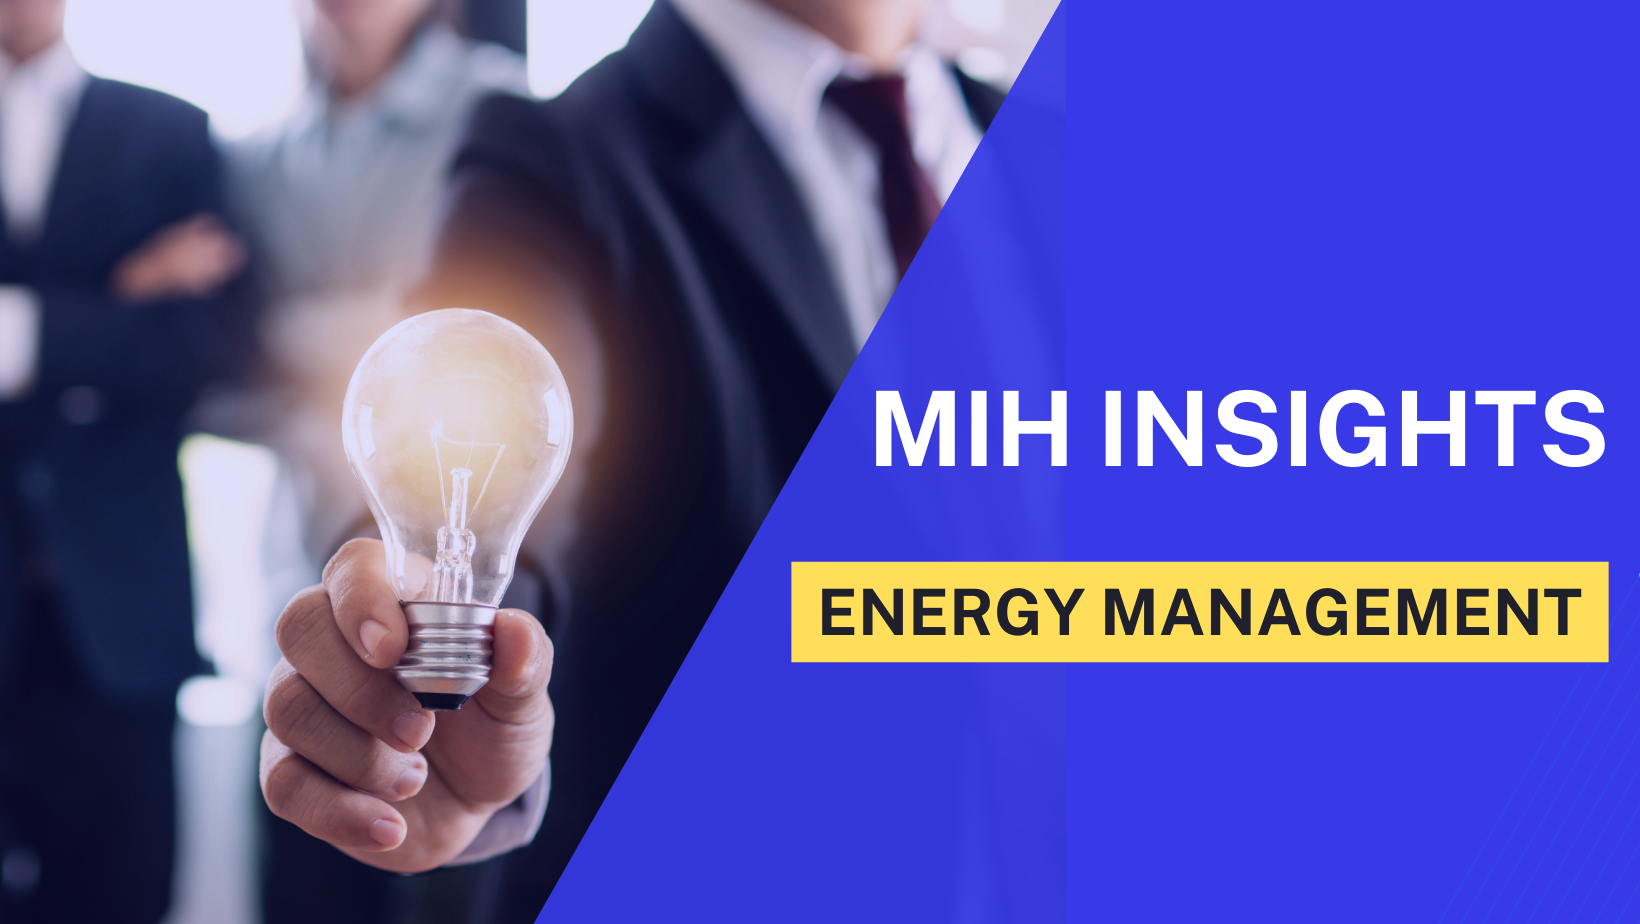 [MIH Insights] Commit to Three Major Fields of Energy Management and Move Towards a Smart and Green Future